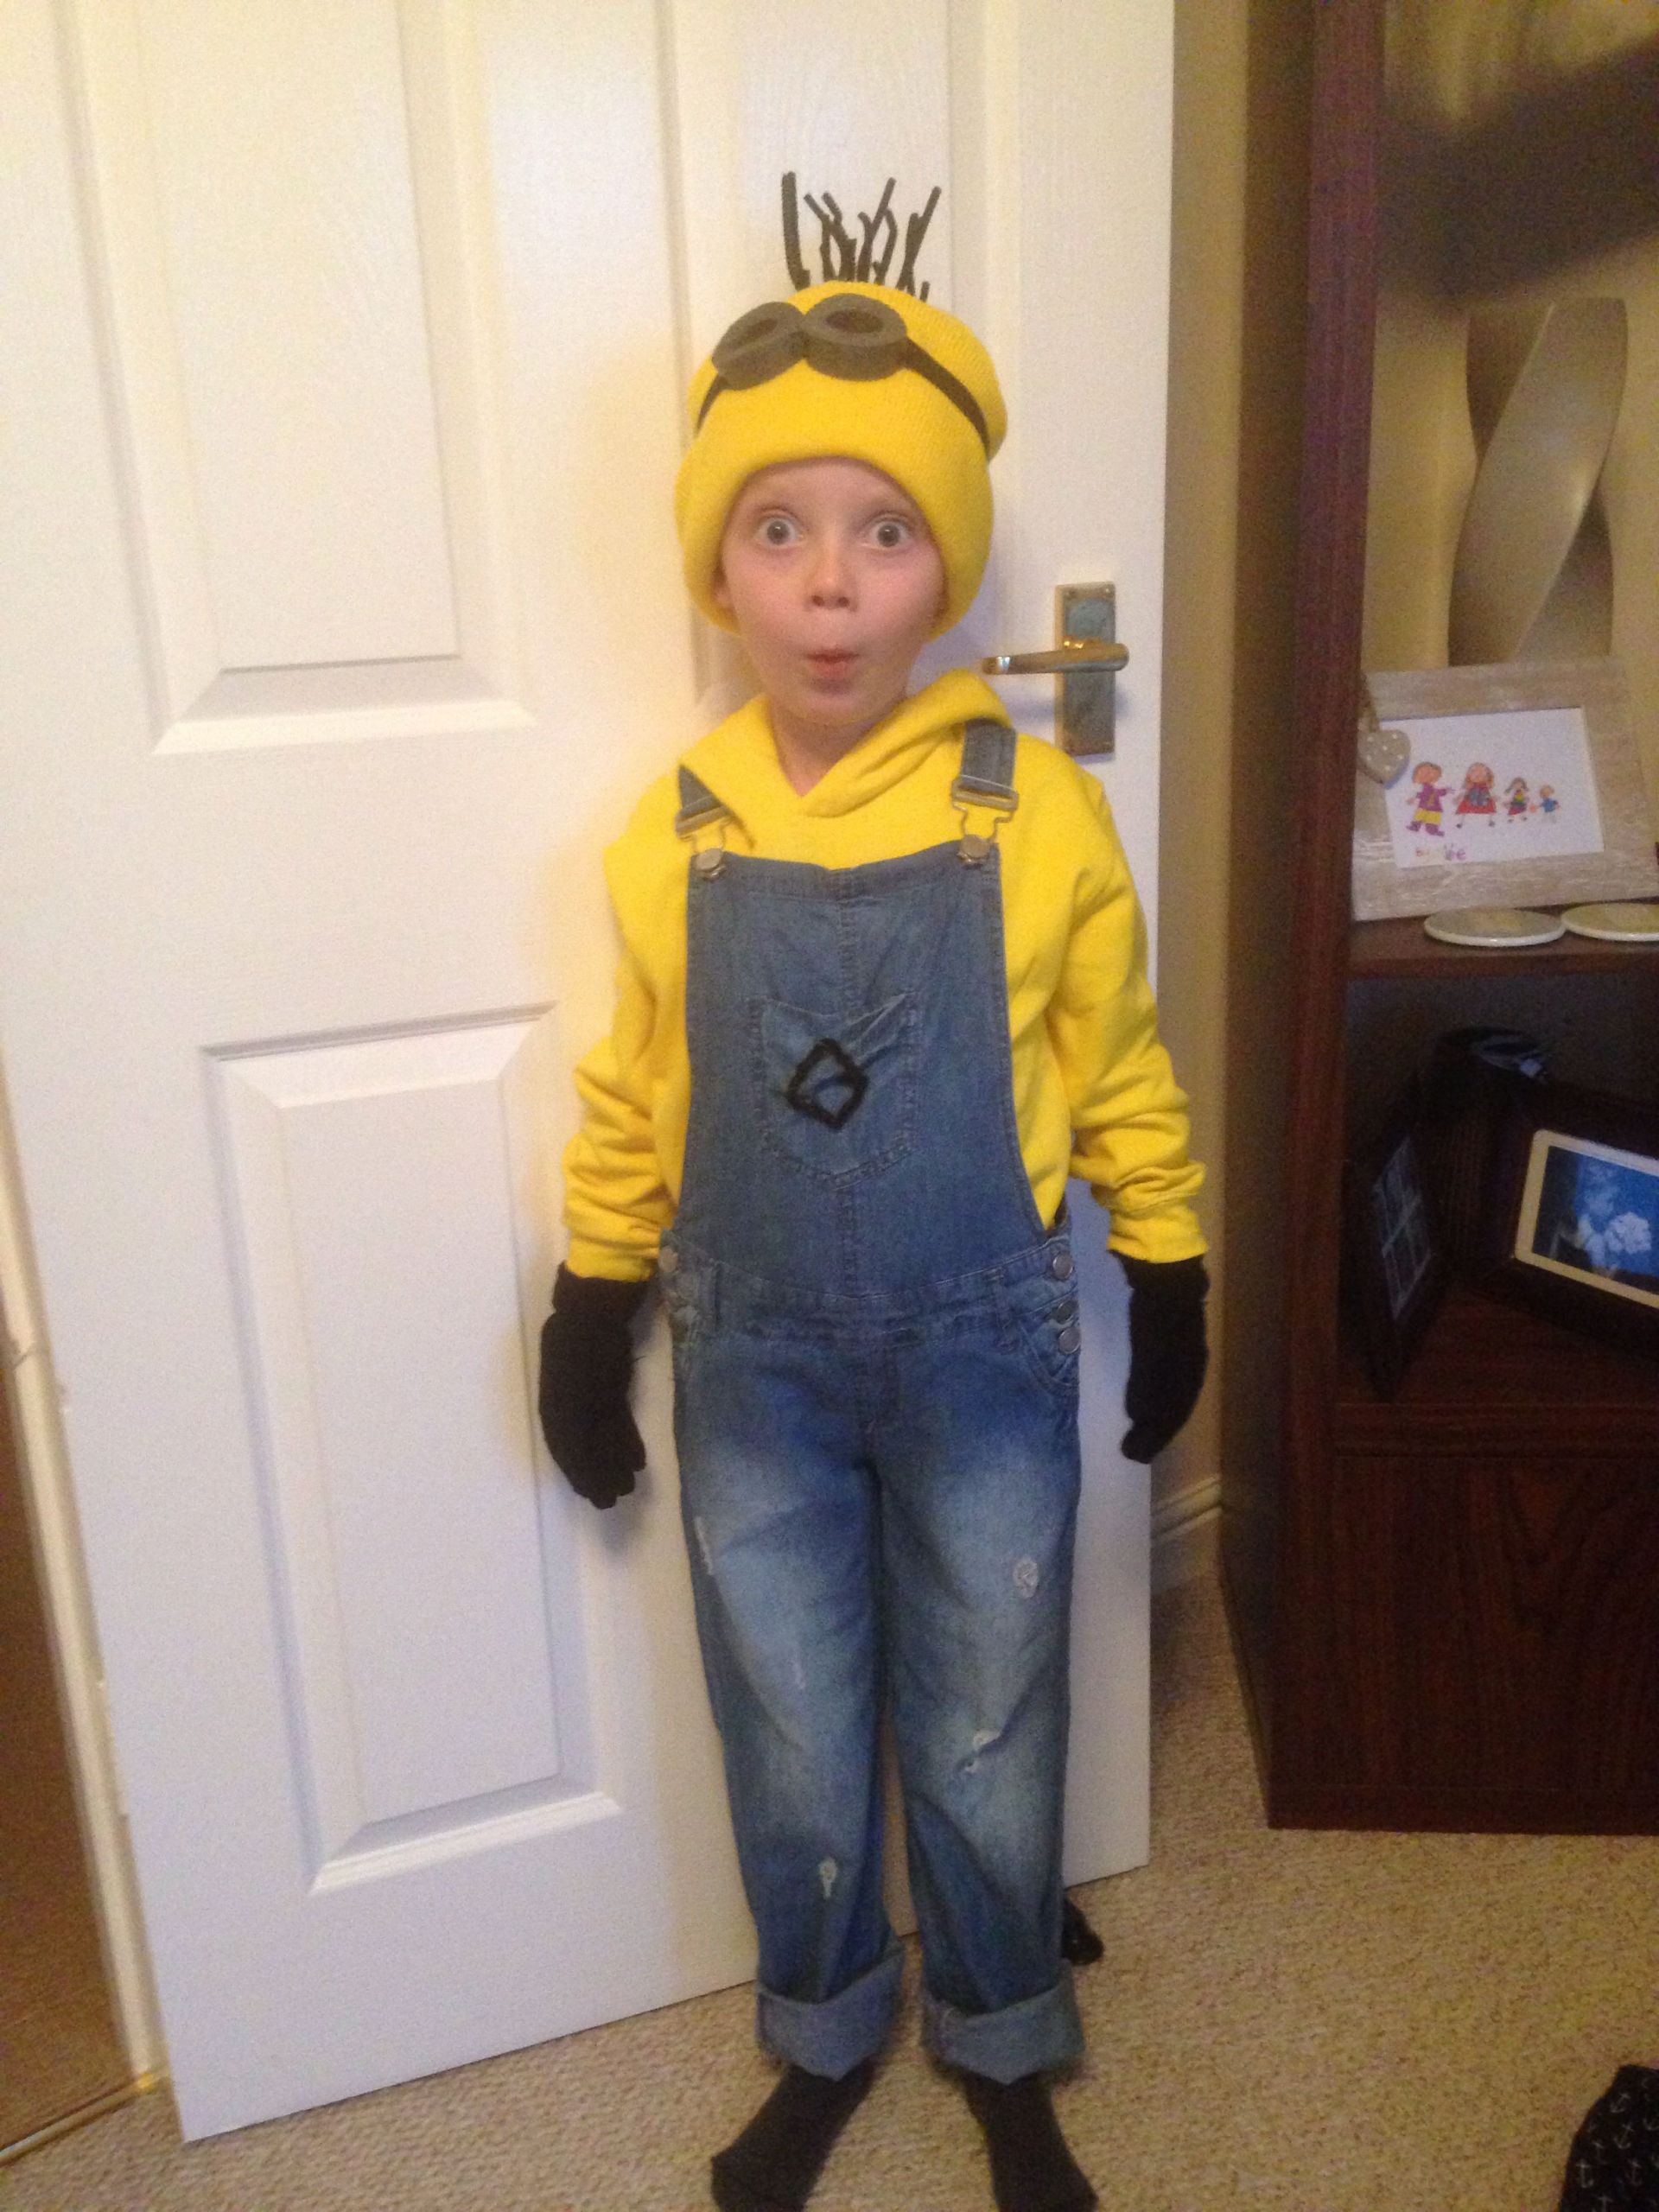 DIY Minion Costume Without Overalls
 Easy homemade Minion costume